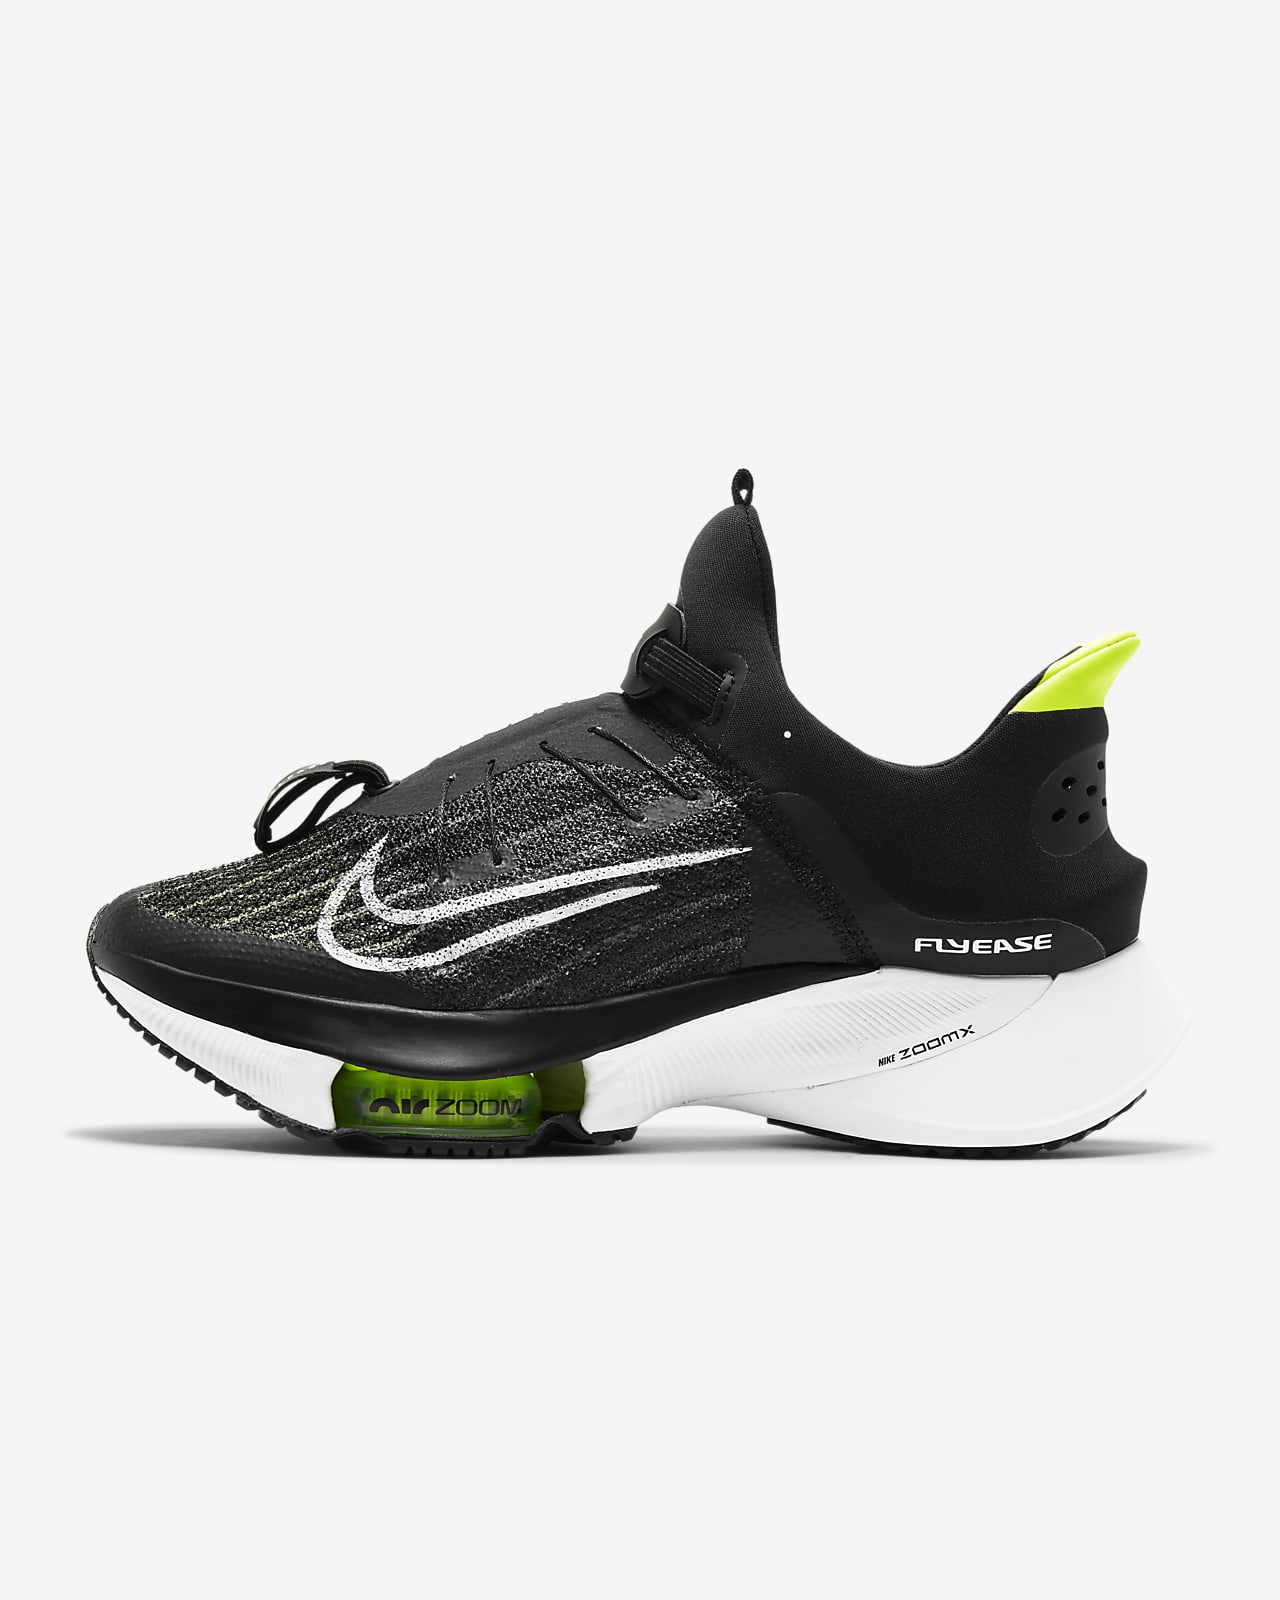 nike flyease running shoes